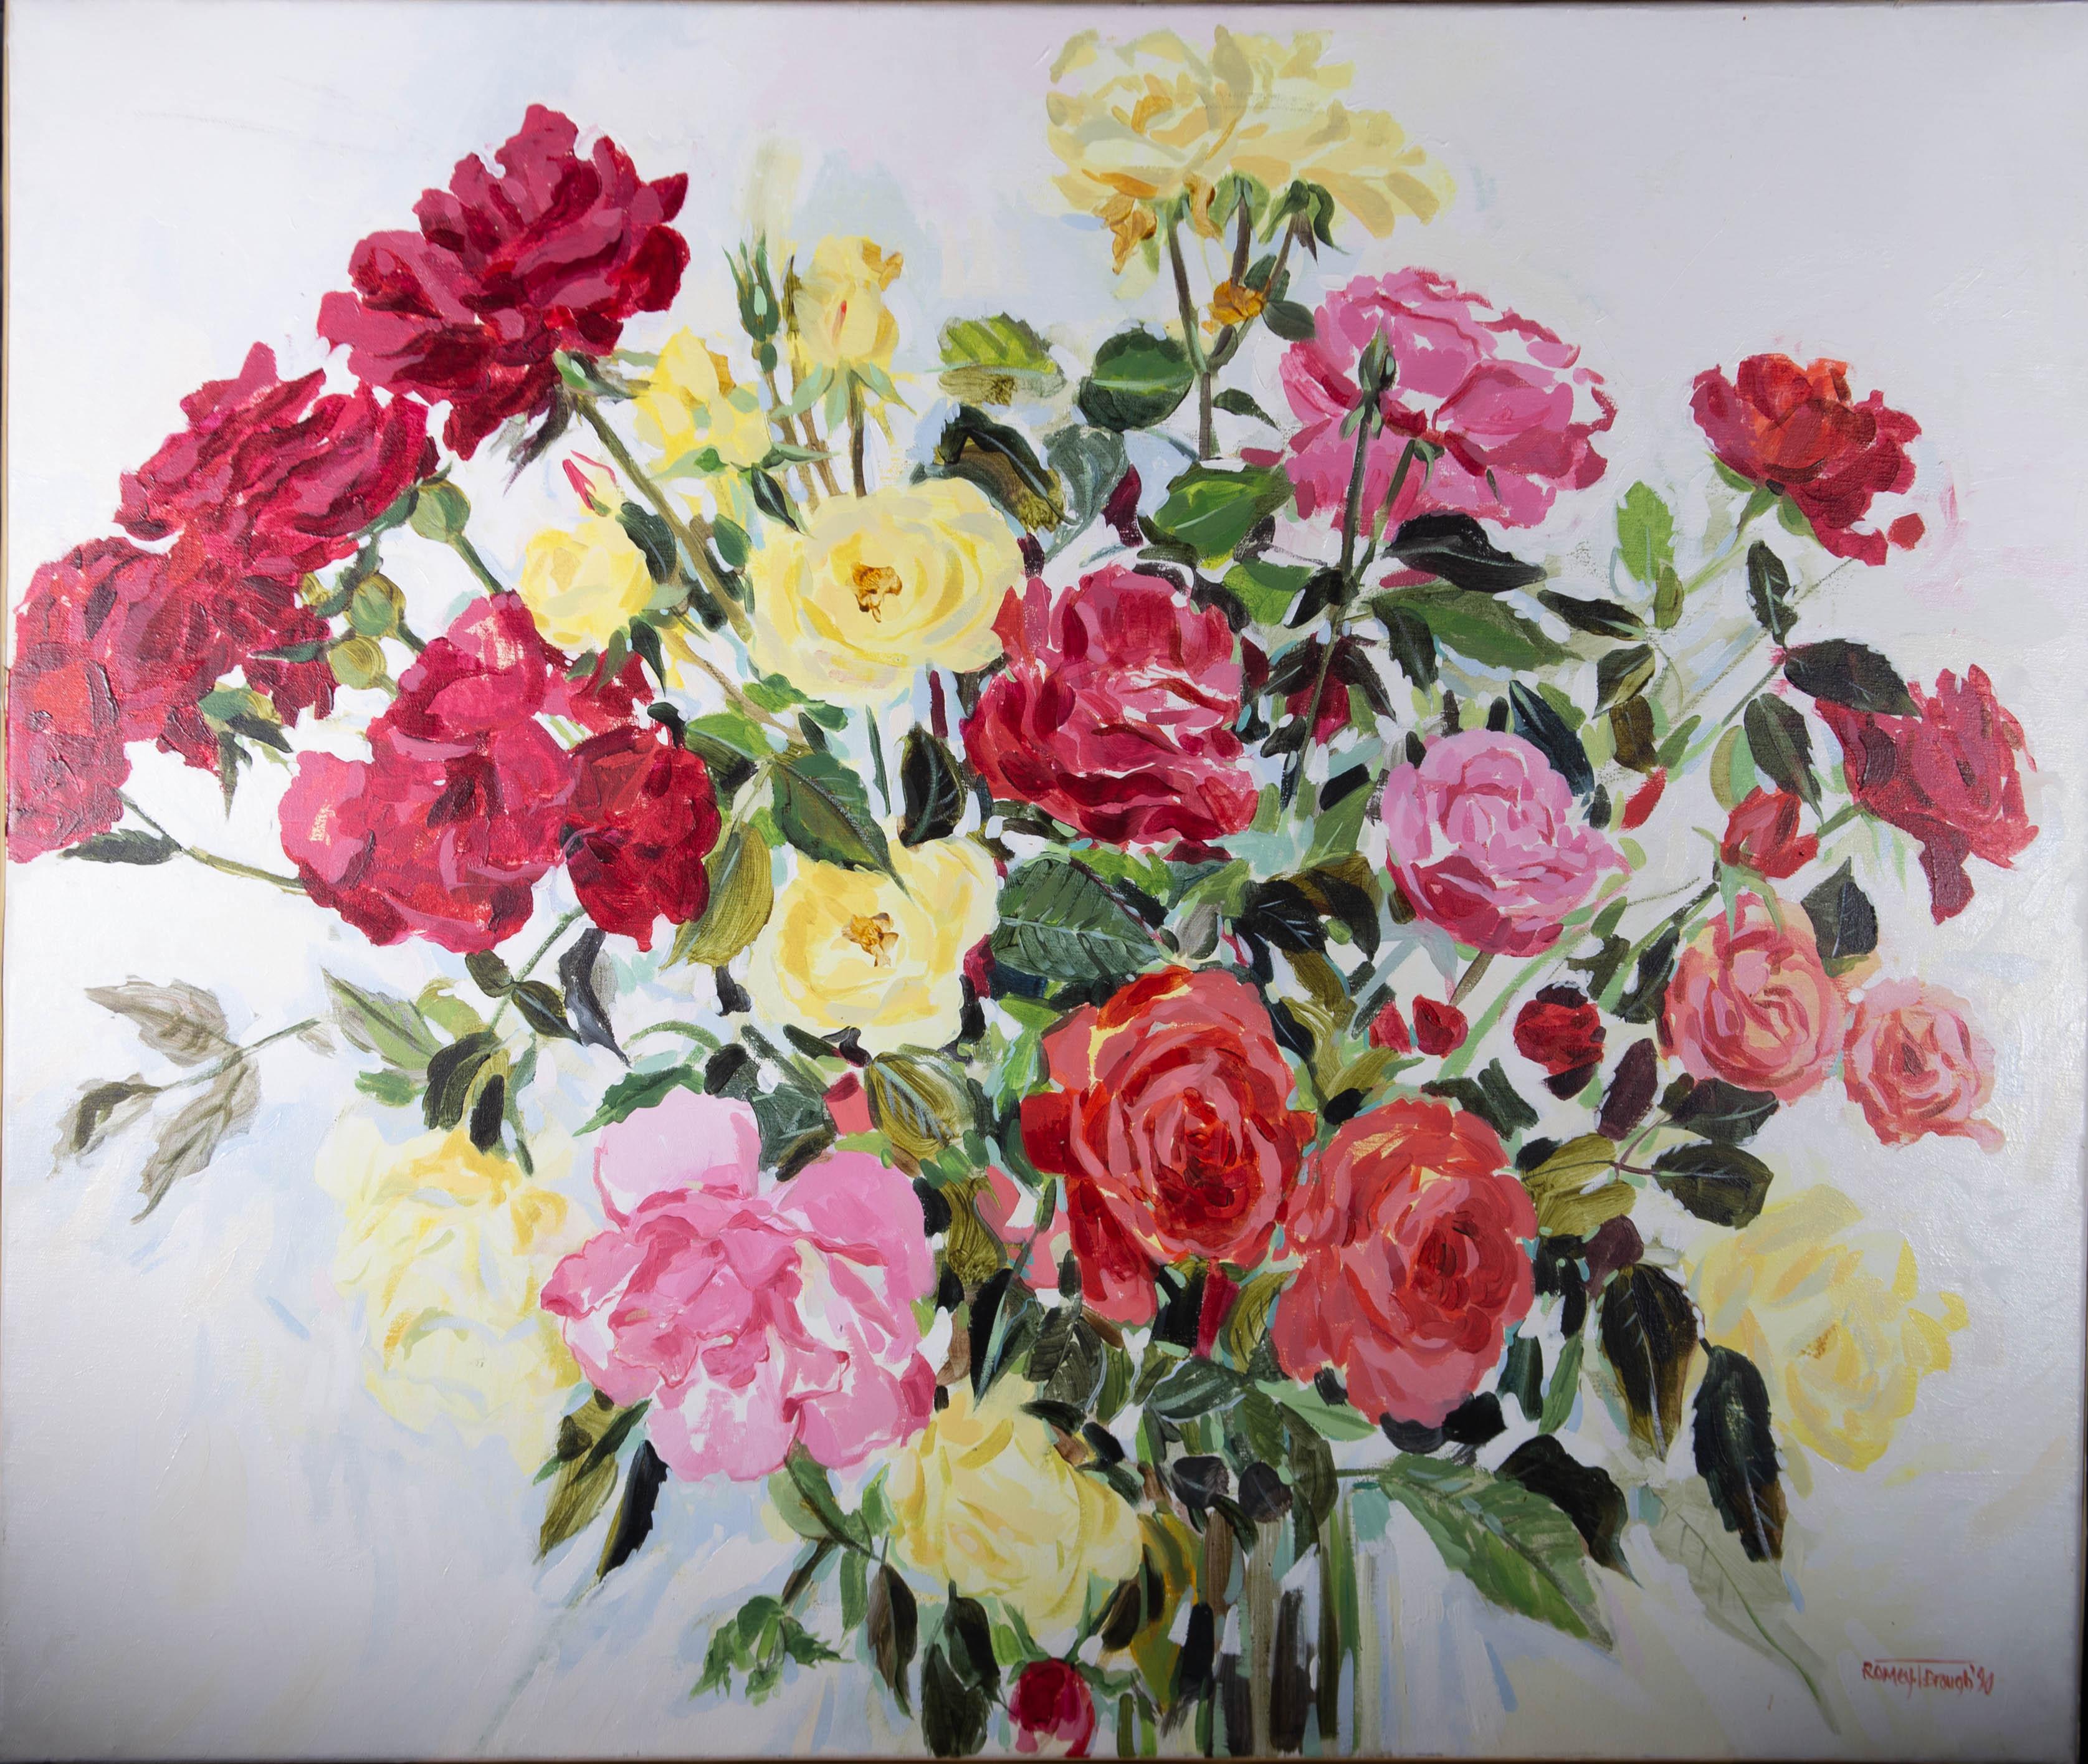 A colourful and decorative oil study of striking size, showing a spray of pretty pink, yellow and red roses. The artist fills the canvas with confident, impressionist brush work. The painting is signed and dated to the lower right corner and